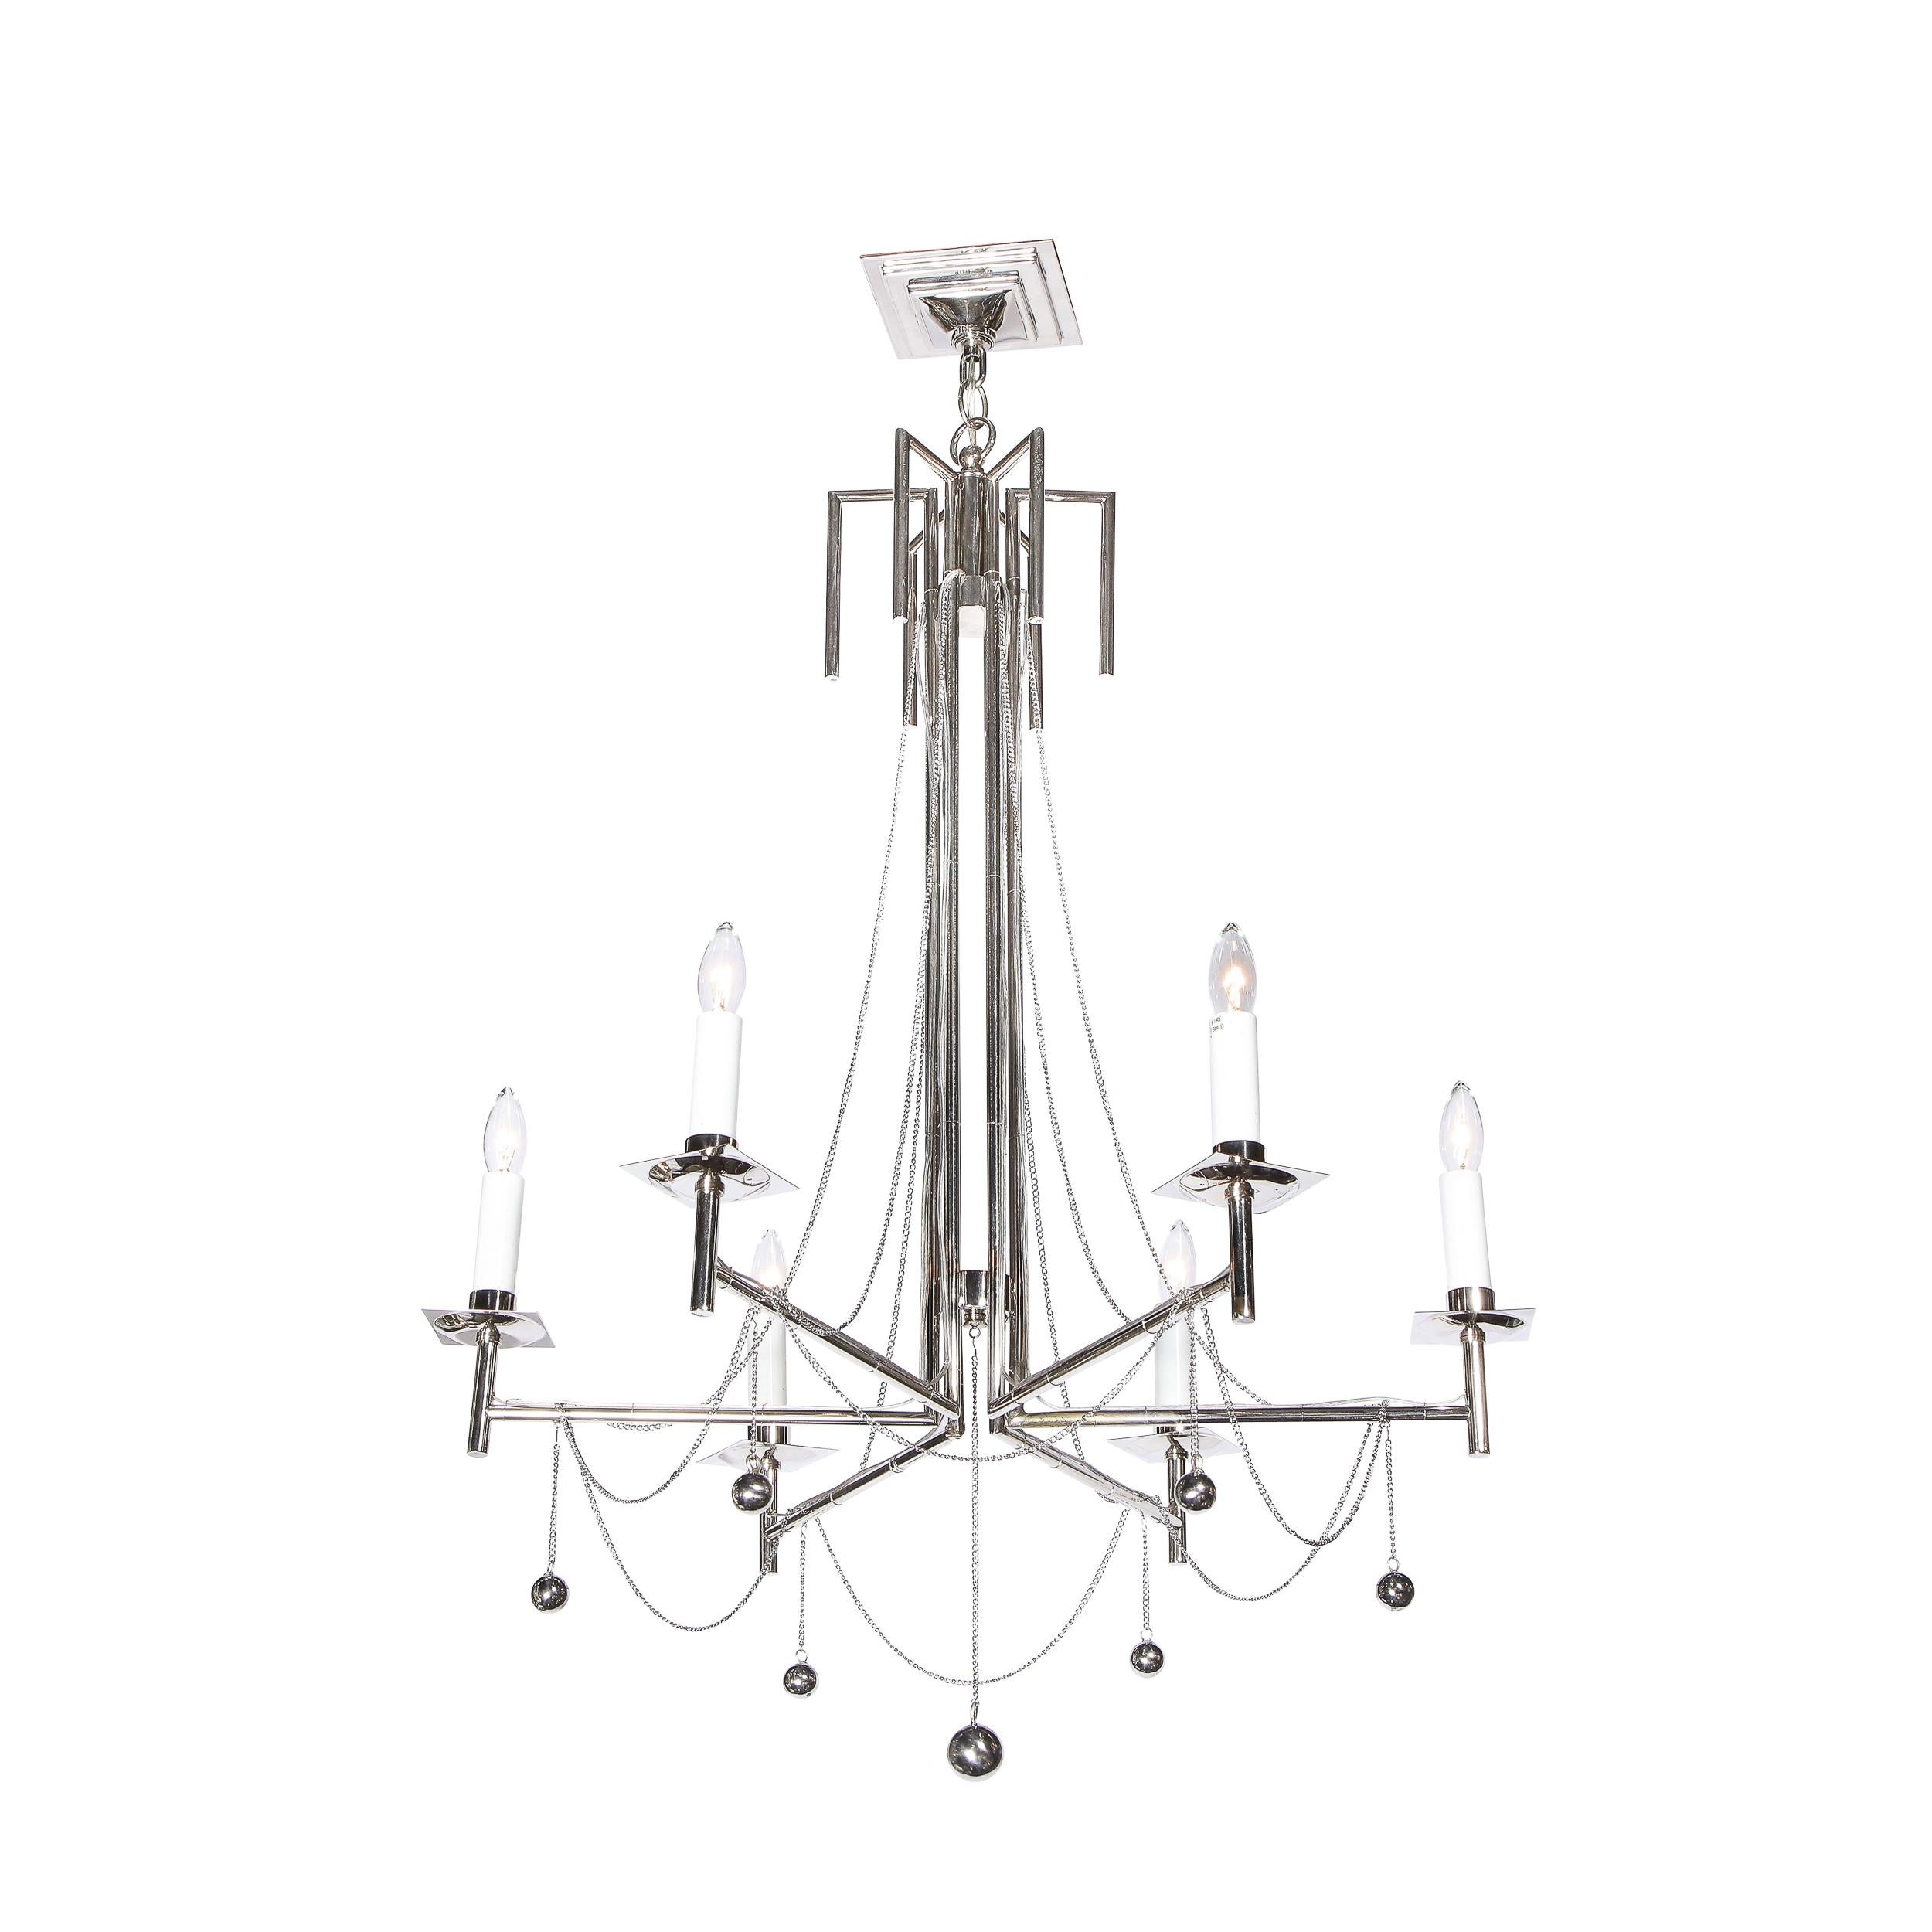 This stunning modernist six arm polished nickel chandelier was realized in the United States in the latter half of the 20th century. It offers six cylindrical polished chrome arms that extend outwards at right angles from vertical rods (of the same